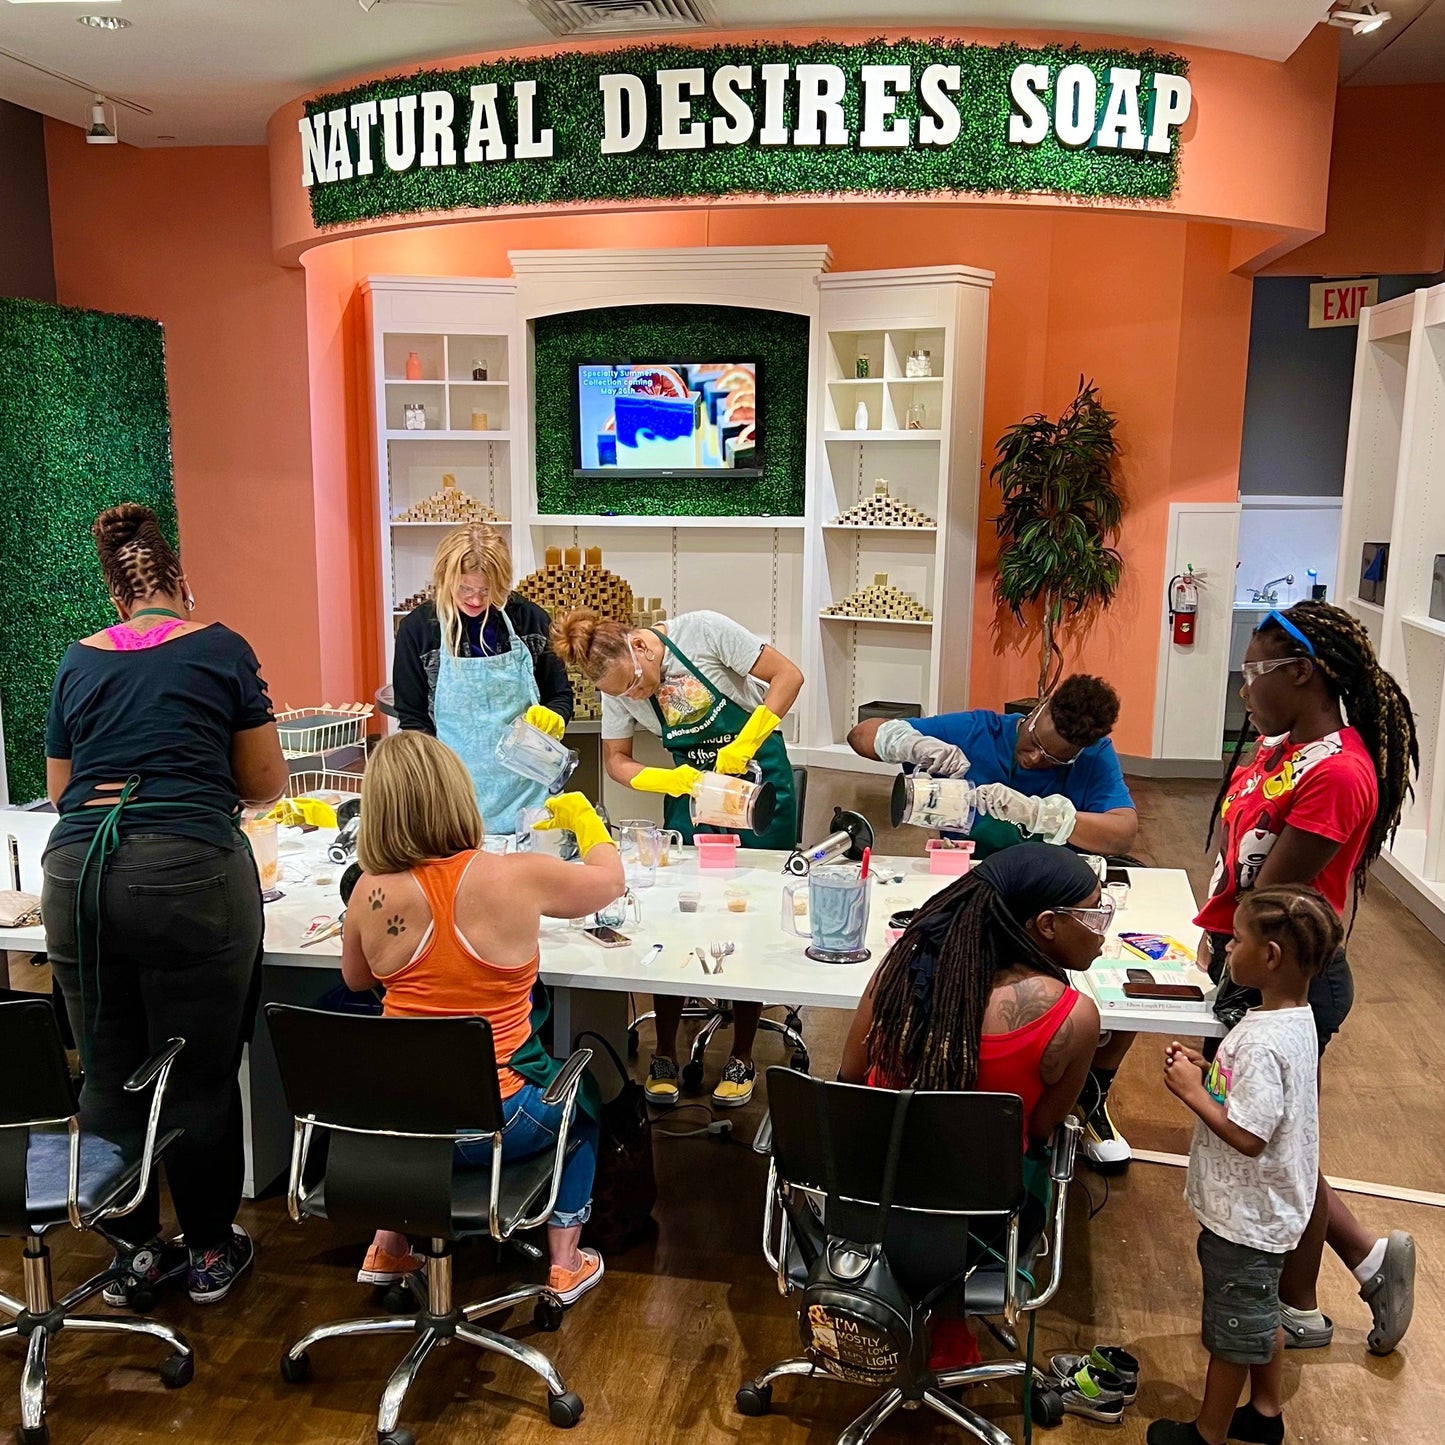 Jennifer's Private Booking Soap Making Class May 18th 2:00 pm